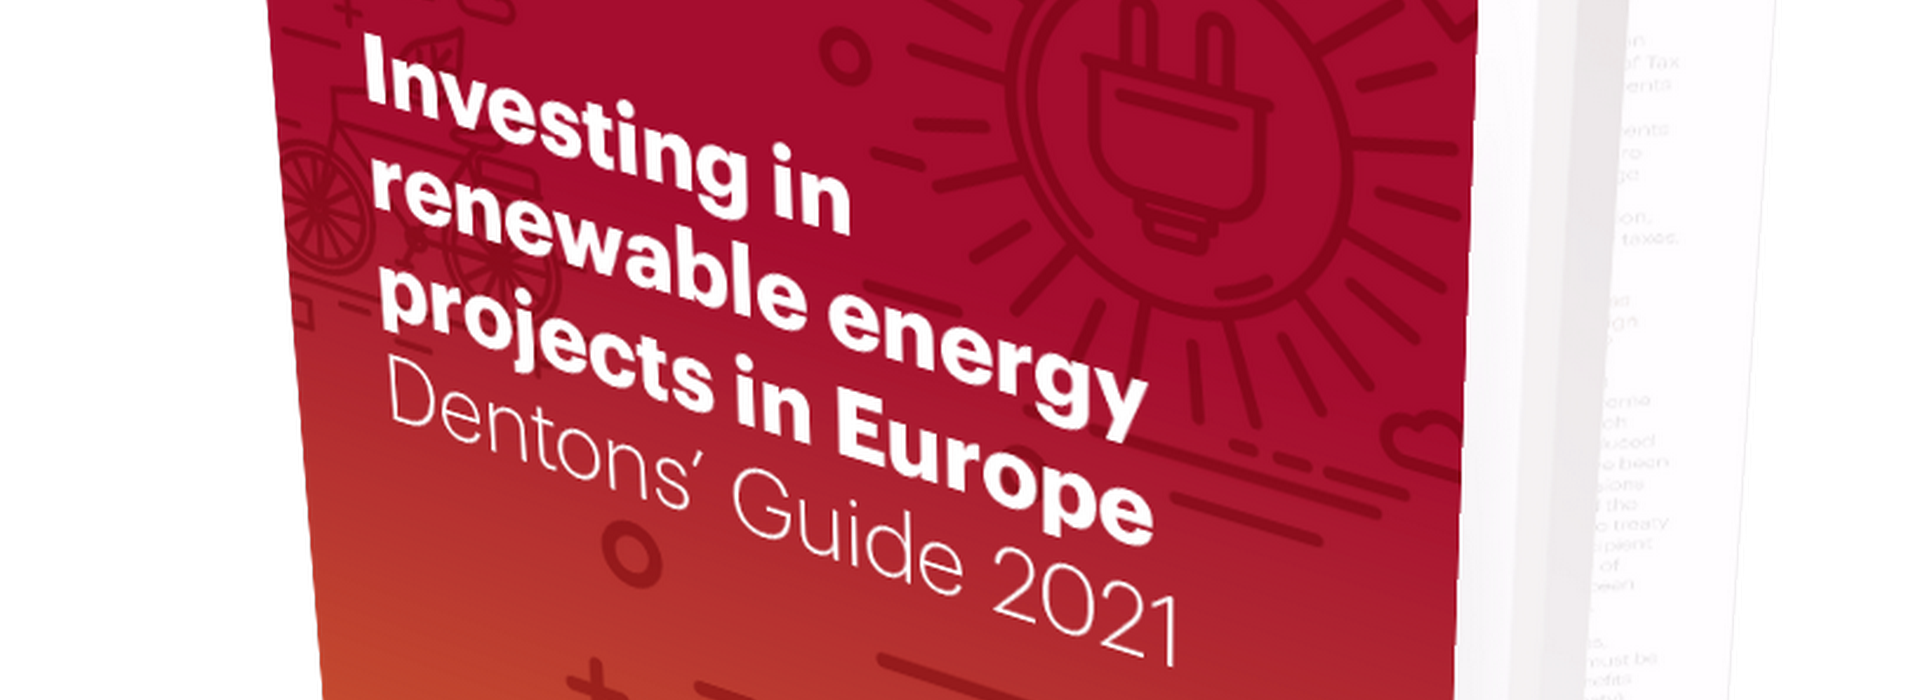 Dentons Launches 2021 Edition of Its ‘Investing in Renewable Energy Projects in Europe’ Guide